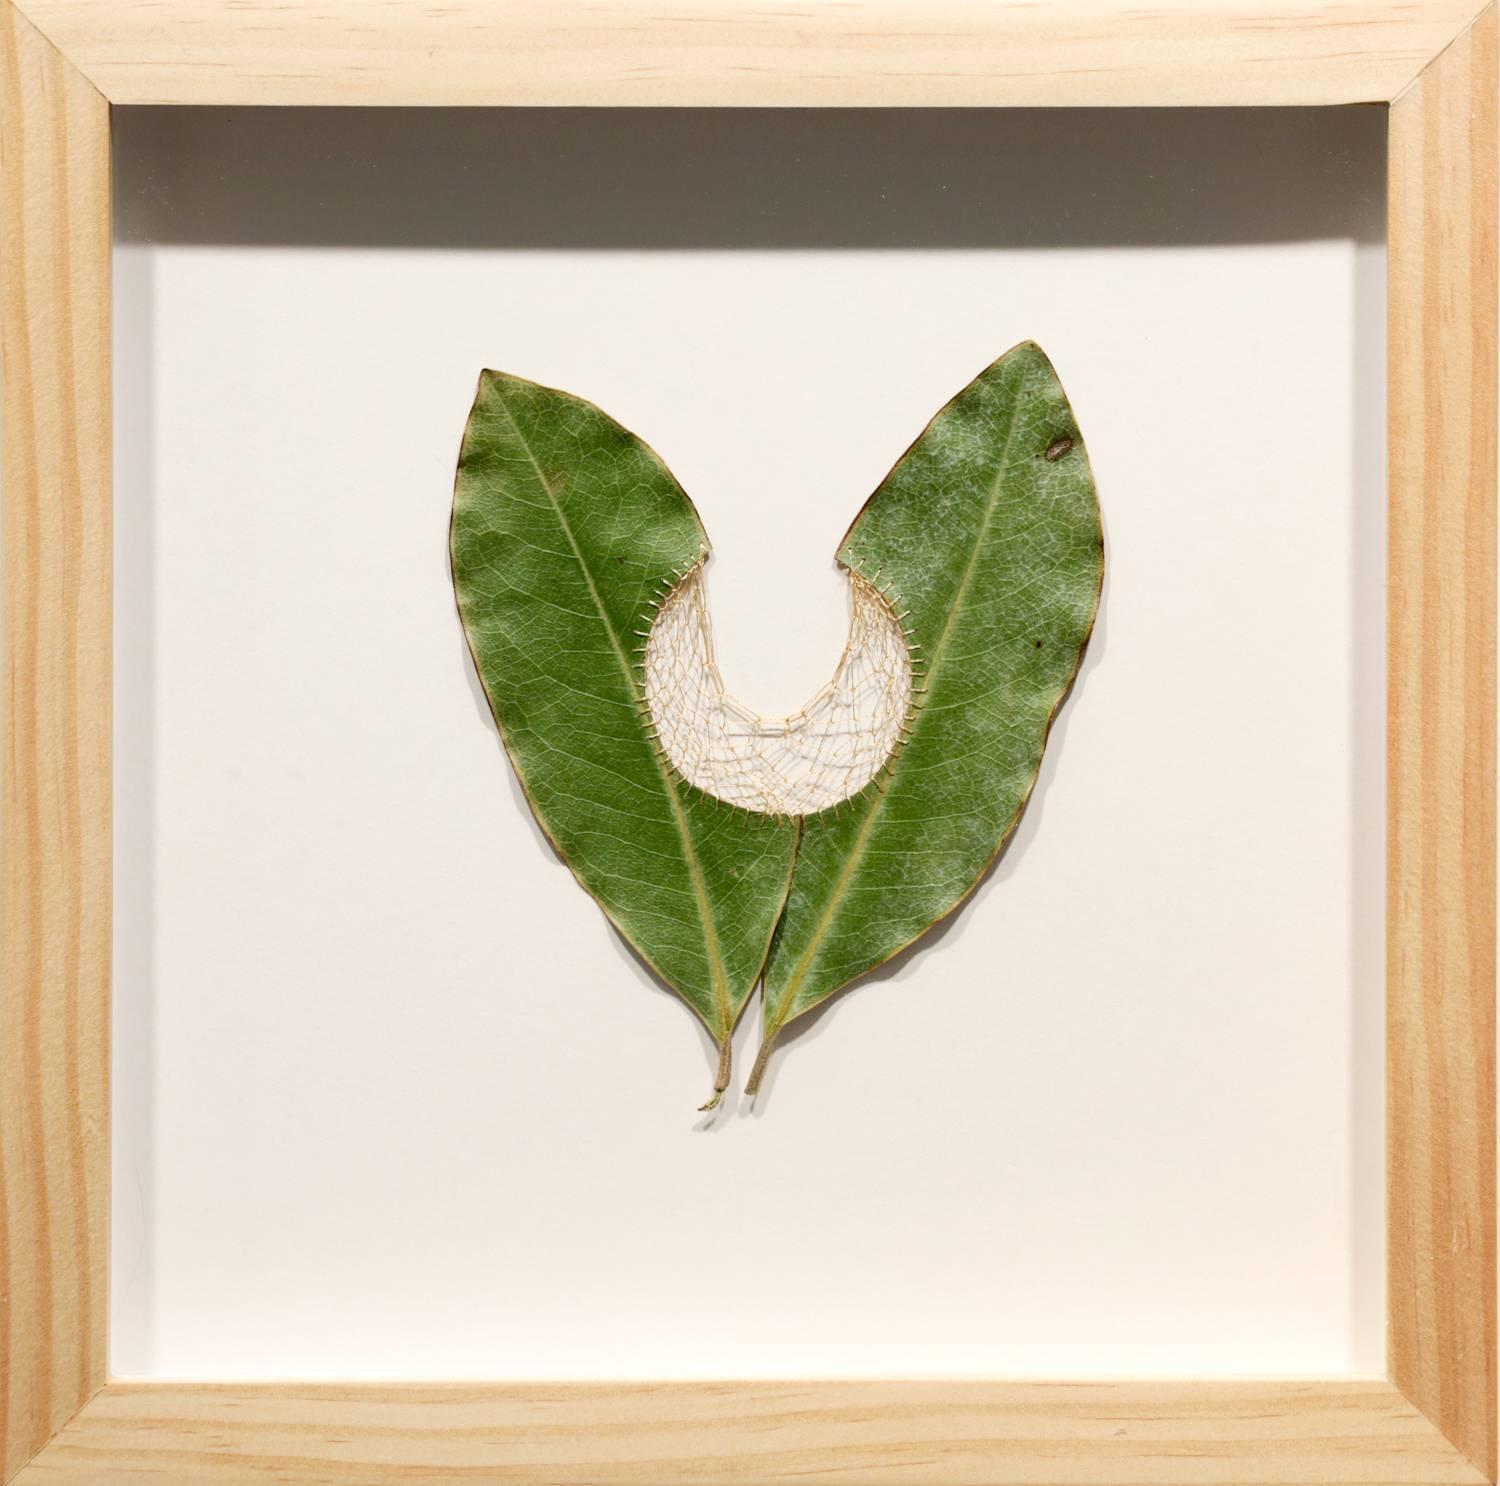 Twice As II, Embroidered Magnolia Leaves with Hand-Dyed Thread - Mixed Media Art by Hillary Waters Fayle